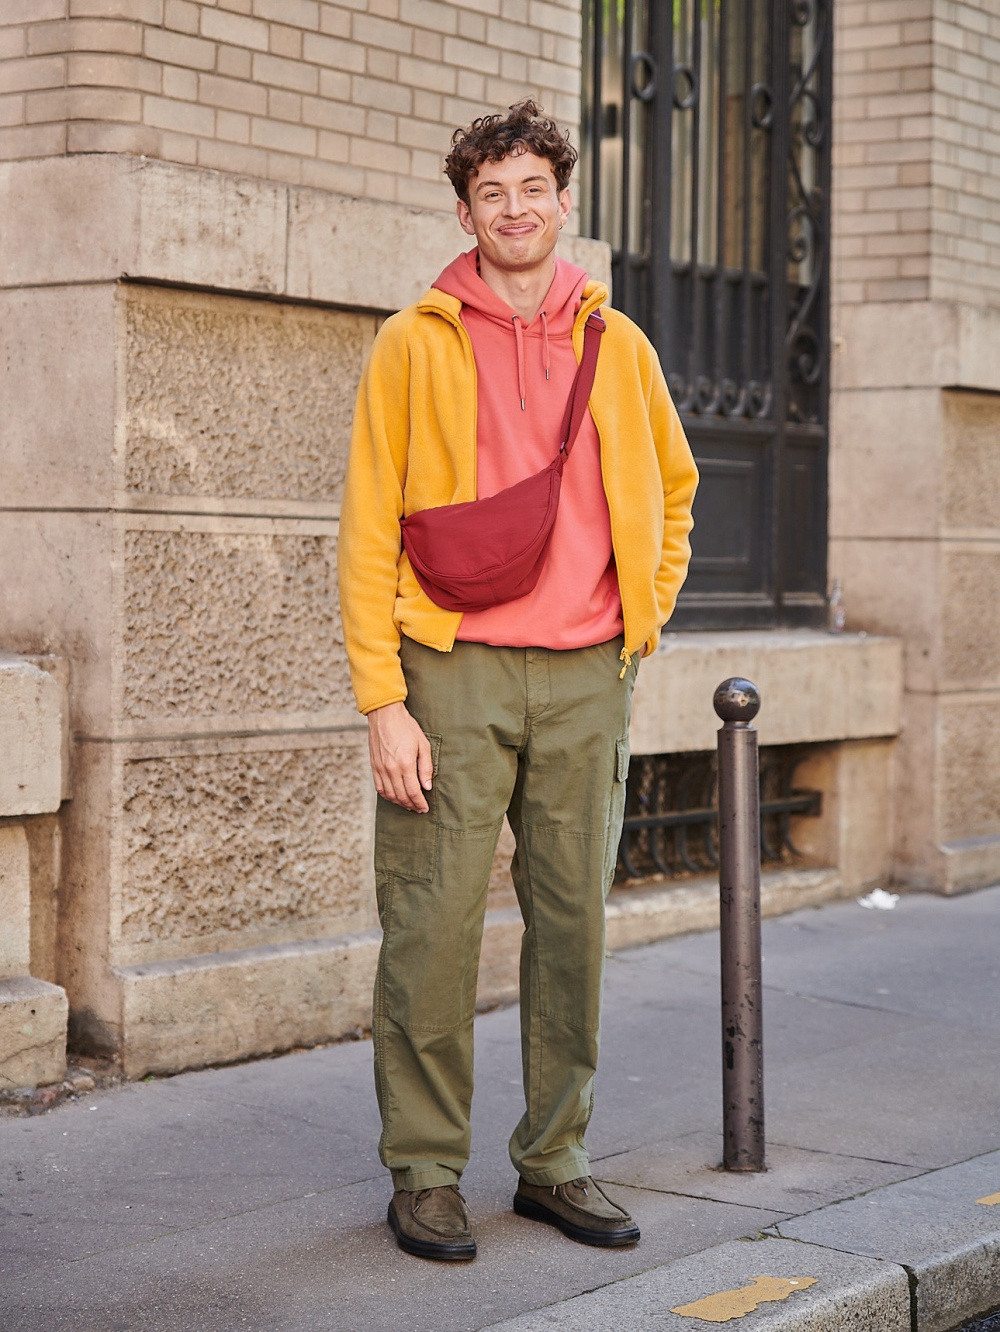 Yellow Sweatshirt with Corduroy Pants Outfits For Men (5 ideas & outfits)